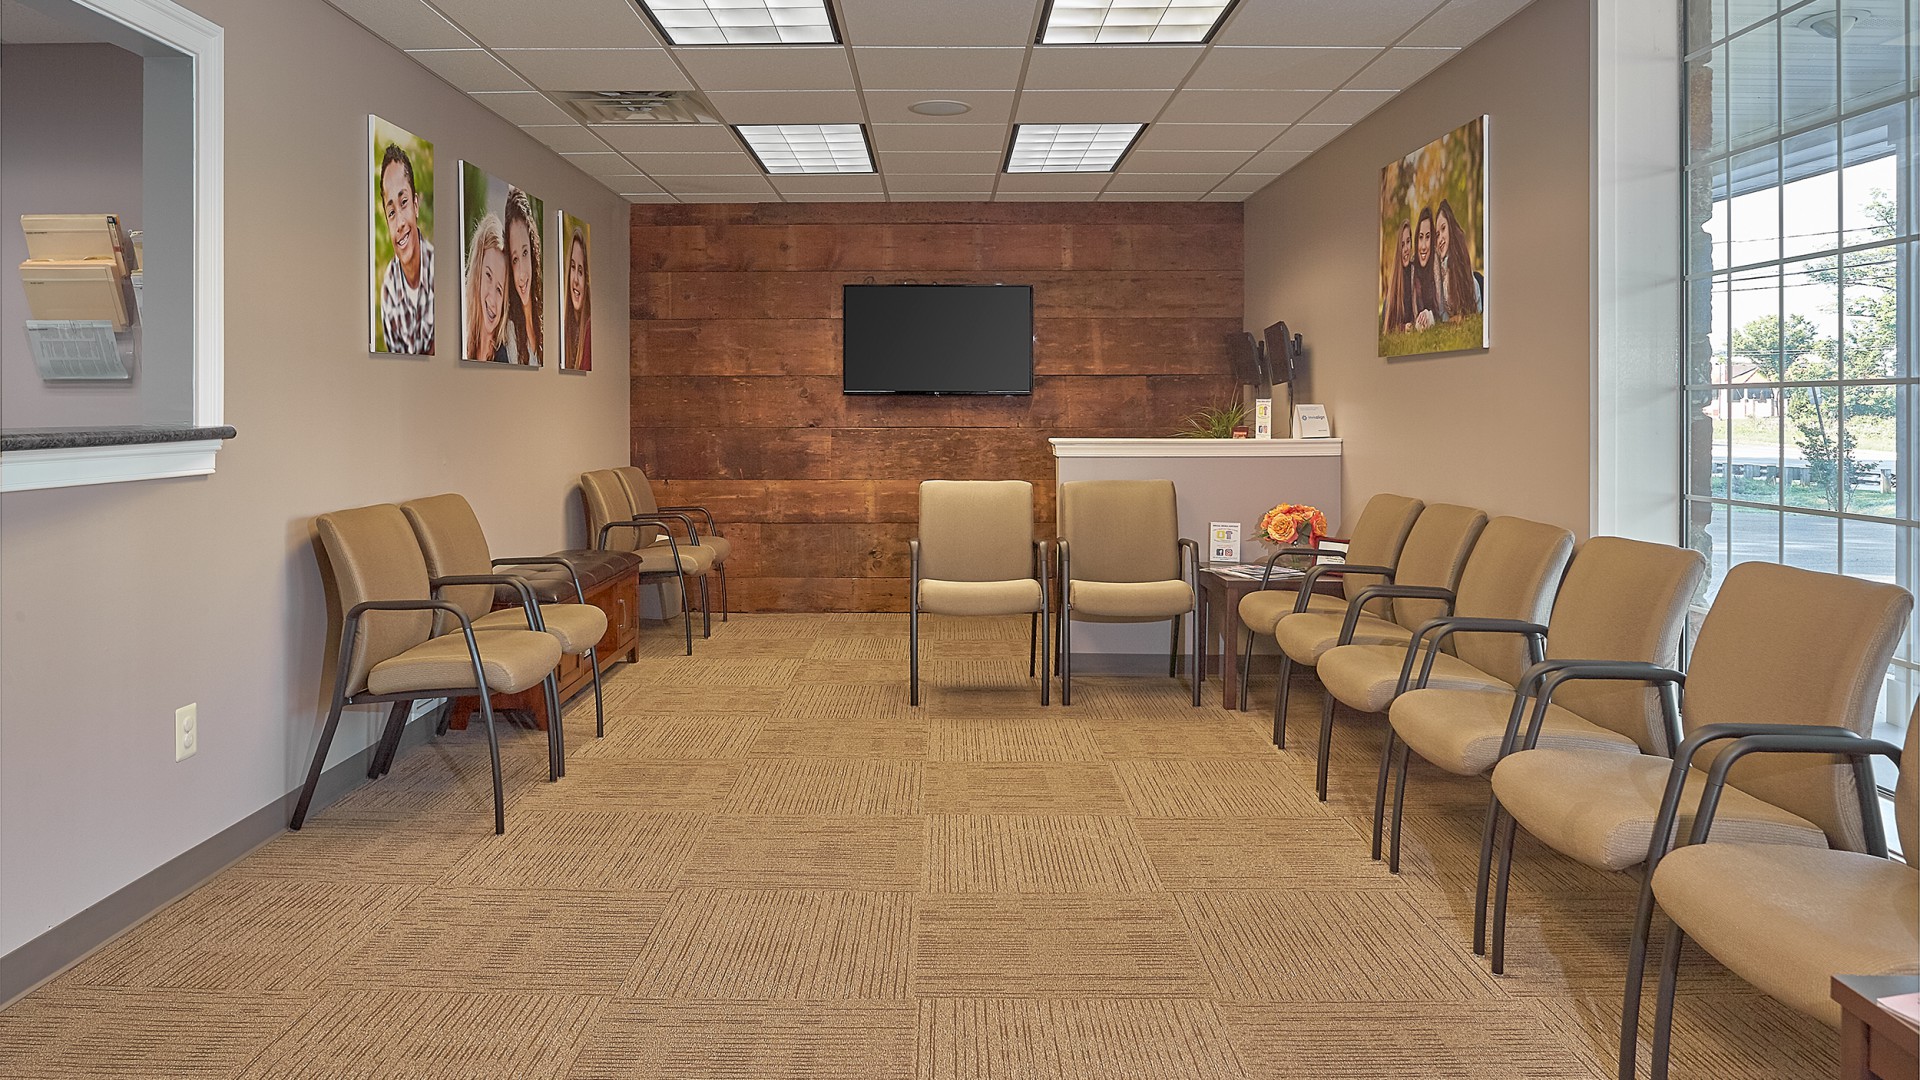 Picture of the waiting area, Mongiovi Orthodontics, Orthodontists in West Chester PA, Orthodontists in Wilmington DE, Orthodontists in Kennett Square, Orthodontists in Chadds Ford